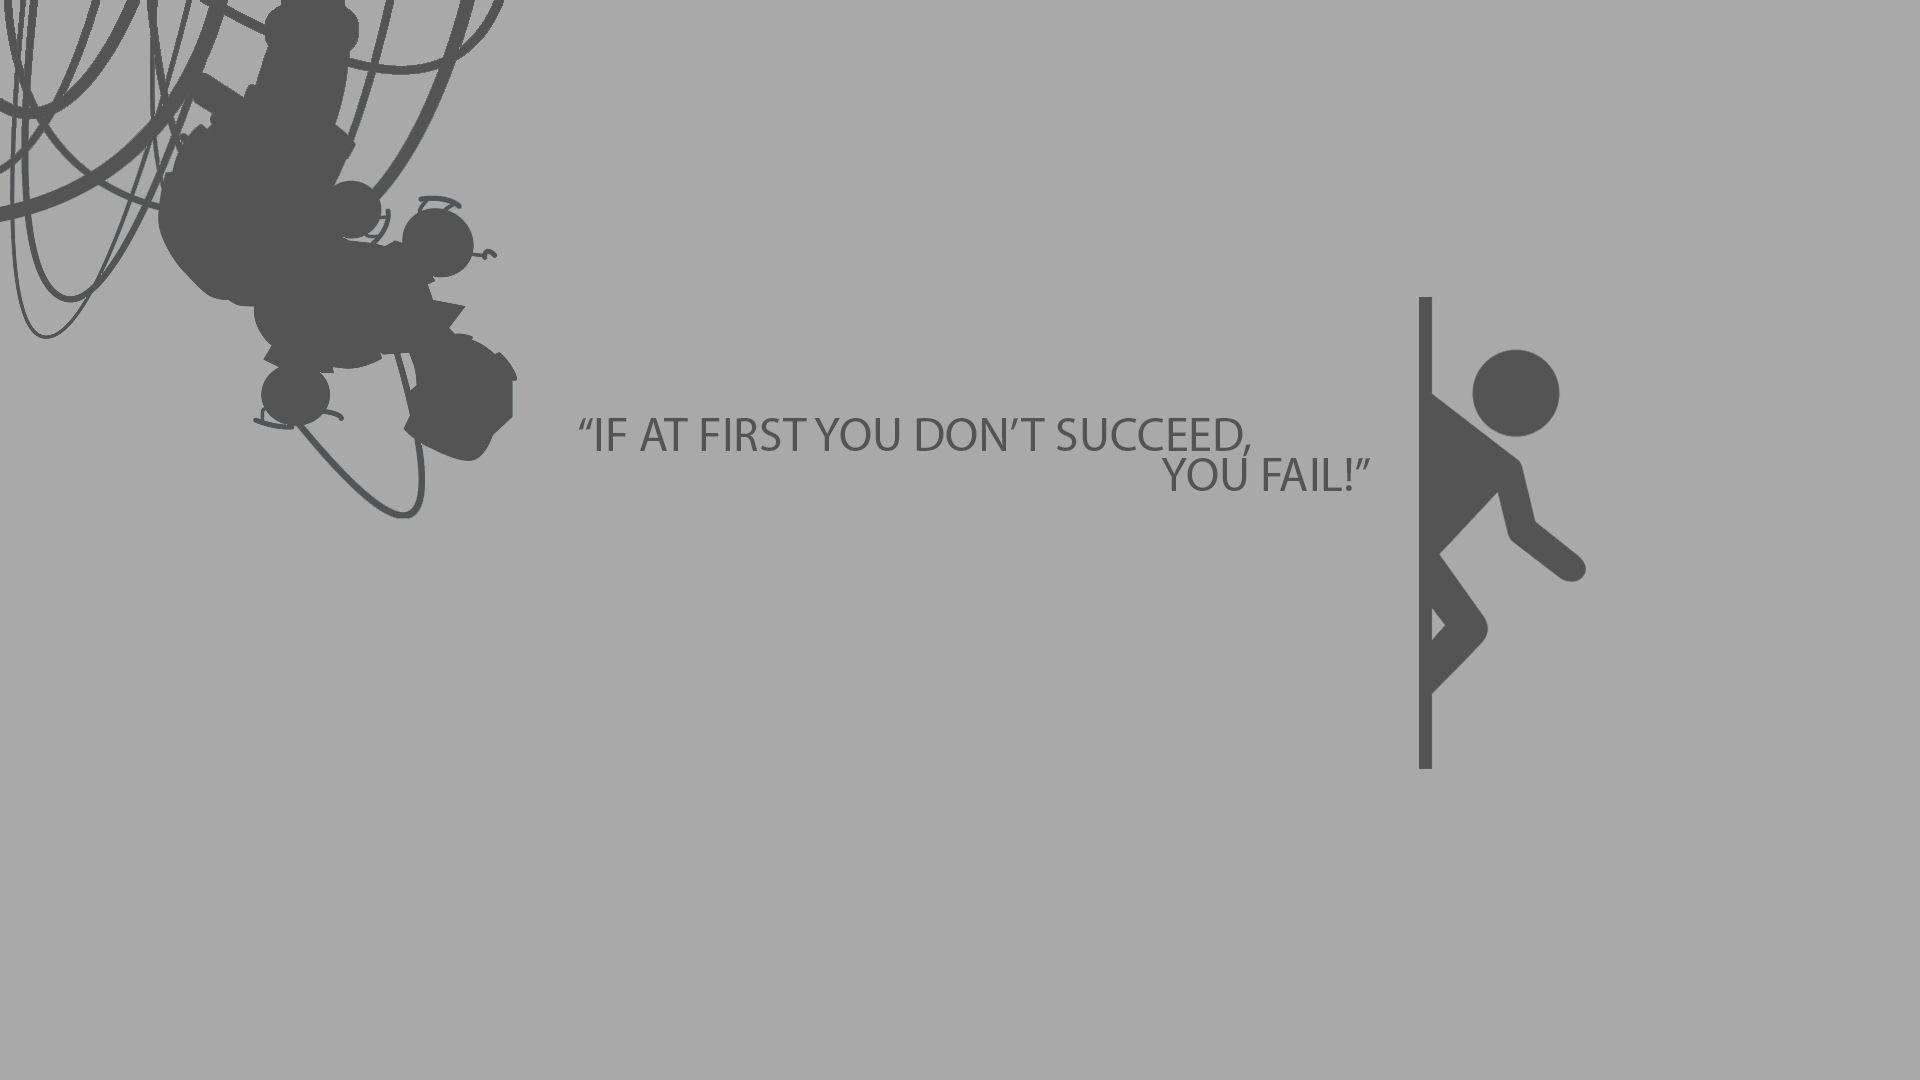 Motivational Wallpaper on Failure: If at first you don't Succeed